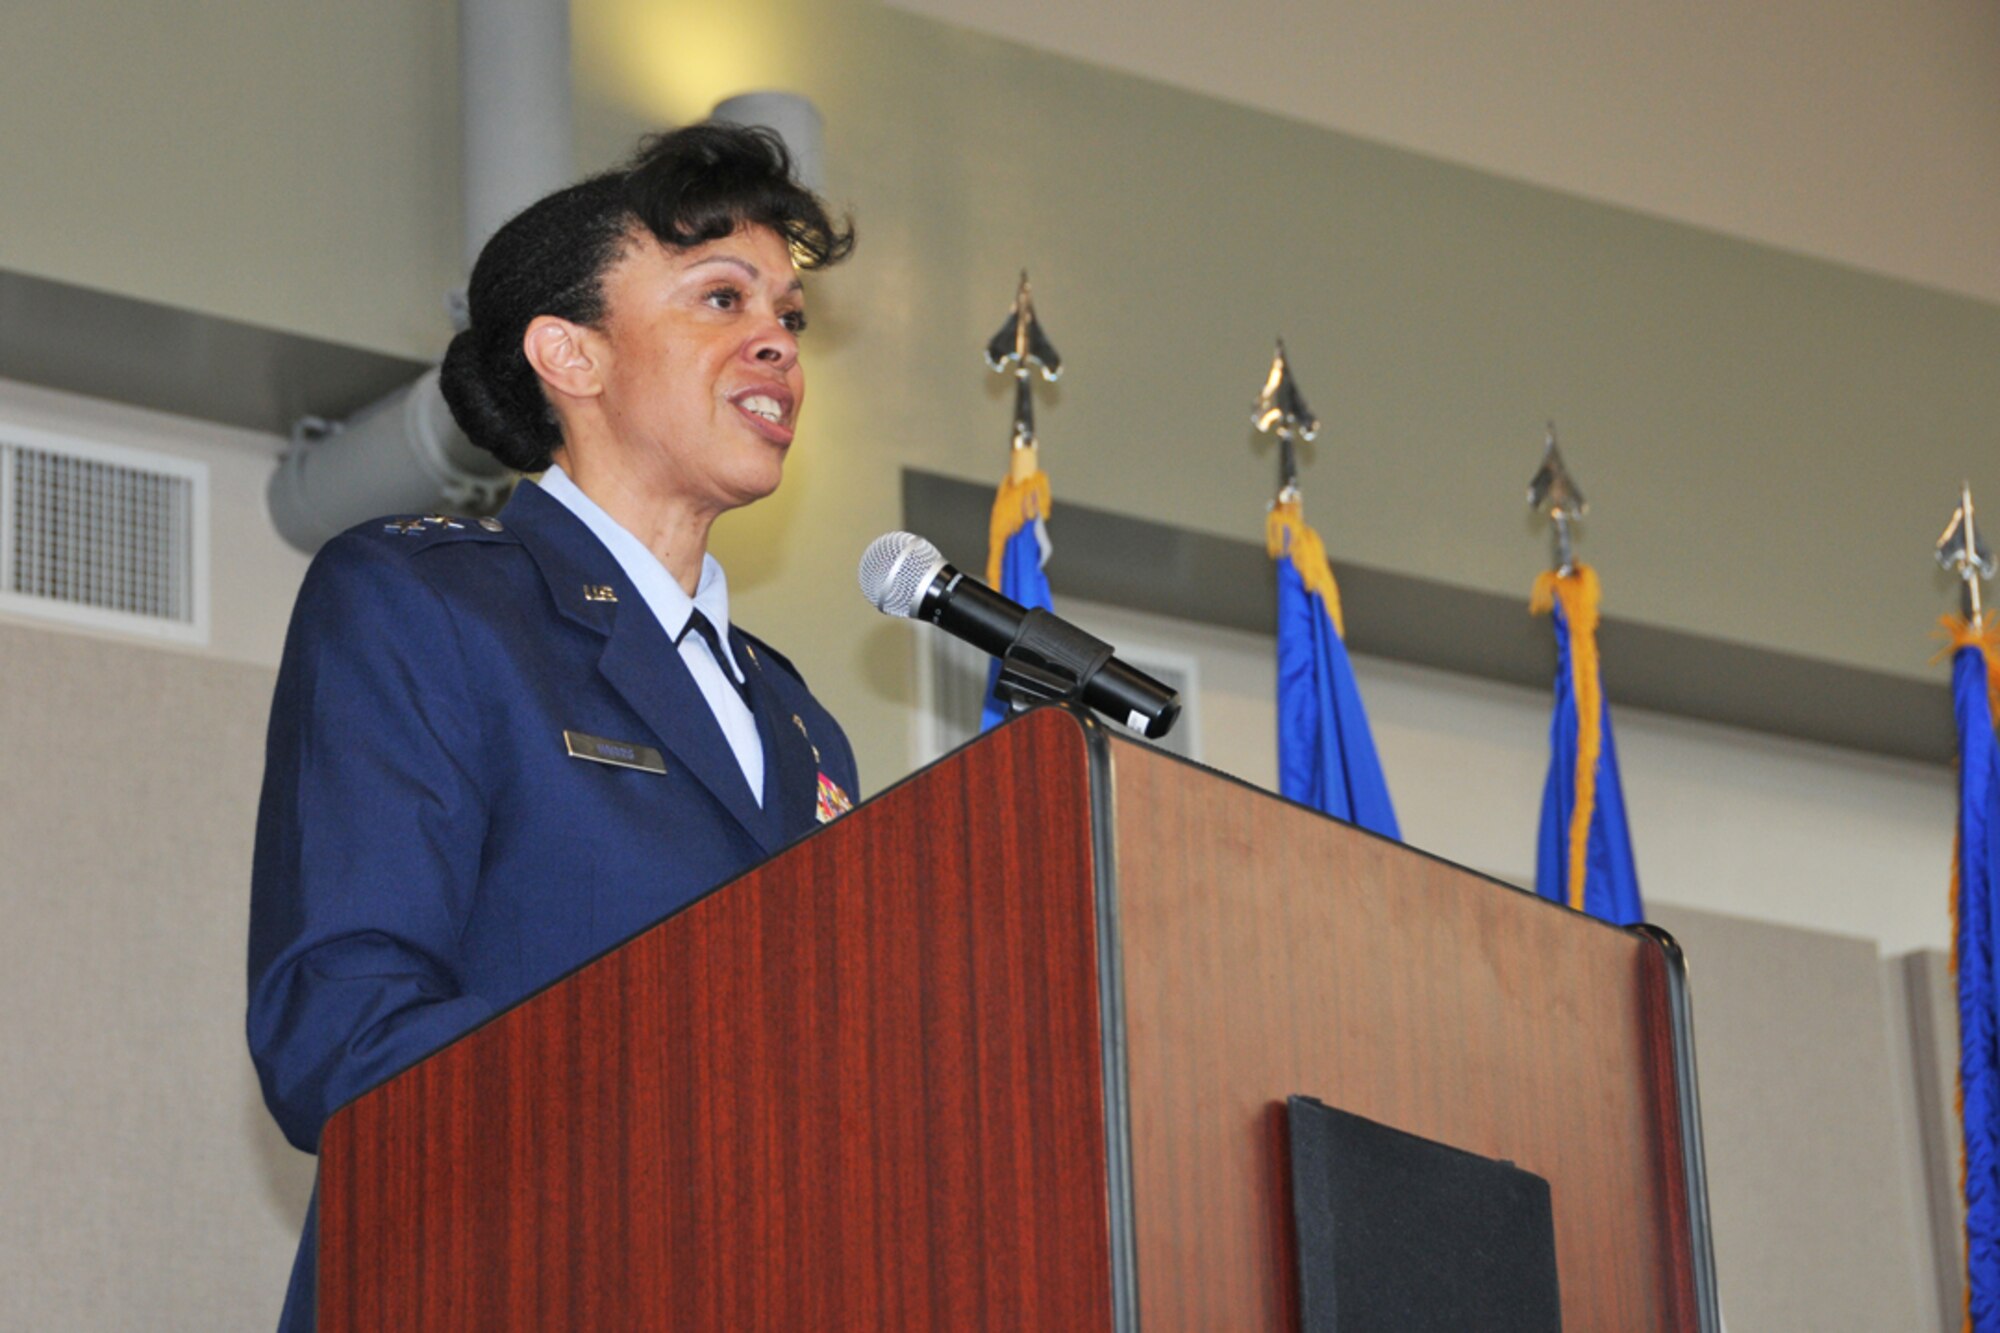 Stayce D. Harris, 22nd Air Force commander, gives remarks during promotion and assumption of command ceremonies, Aug. 9, 2014 at Dobbins Air Reserve Base, Ga. Harris will oversee 15,000 Reservists and 105 unit-equipped aircraft. She will have command supervision of the Reserve's air mobility operations and other vital mission sets. Reserve aircrews within 22nd Air Force fly a variety of missions to include aerial spraying, fire suppression, hurricane hunters to troop transport utilizing the C-130 Hercules. (U.S. Air Force photo/Staff Sgt. Jaclyn McDonald)